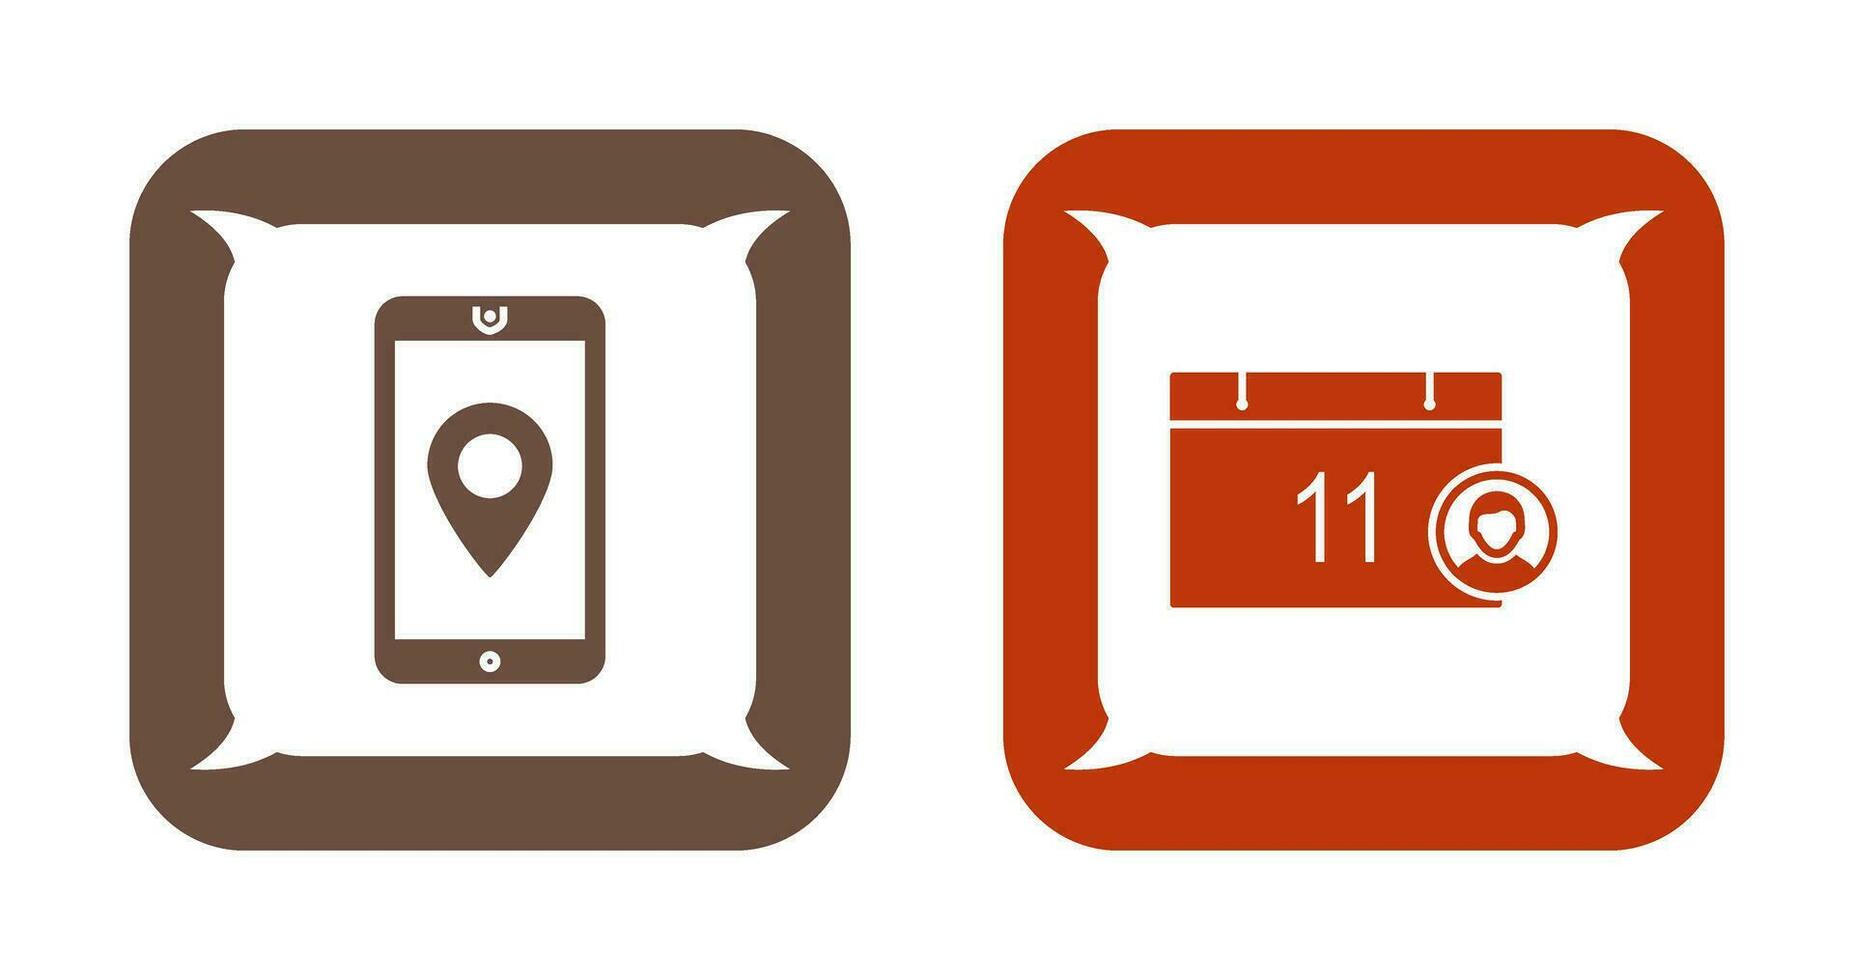 gps service and event management Icon vector